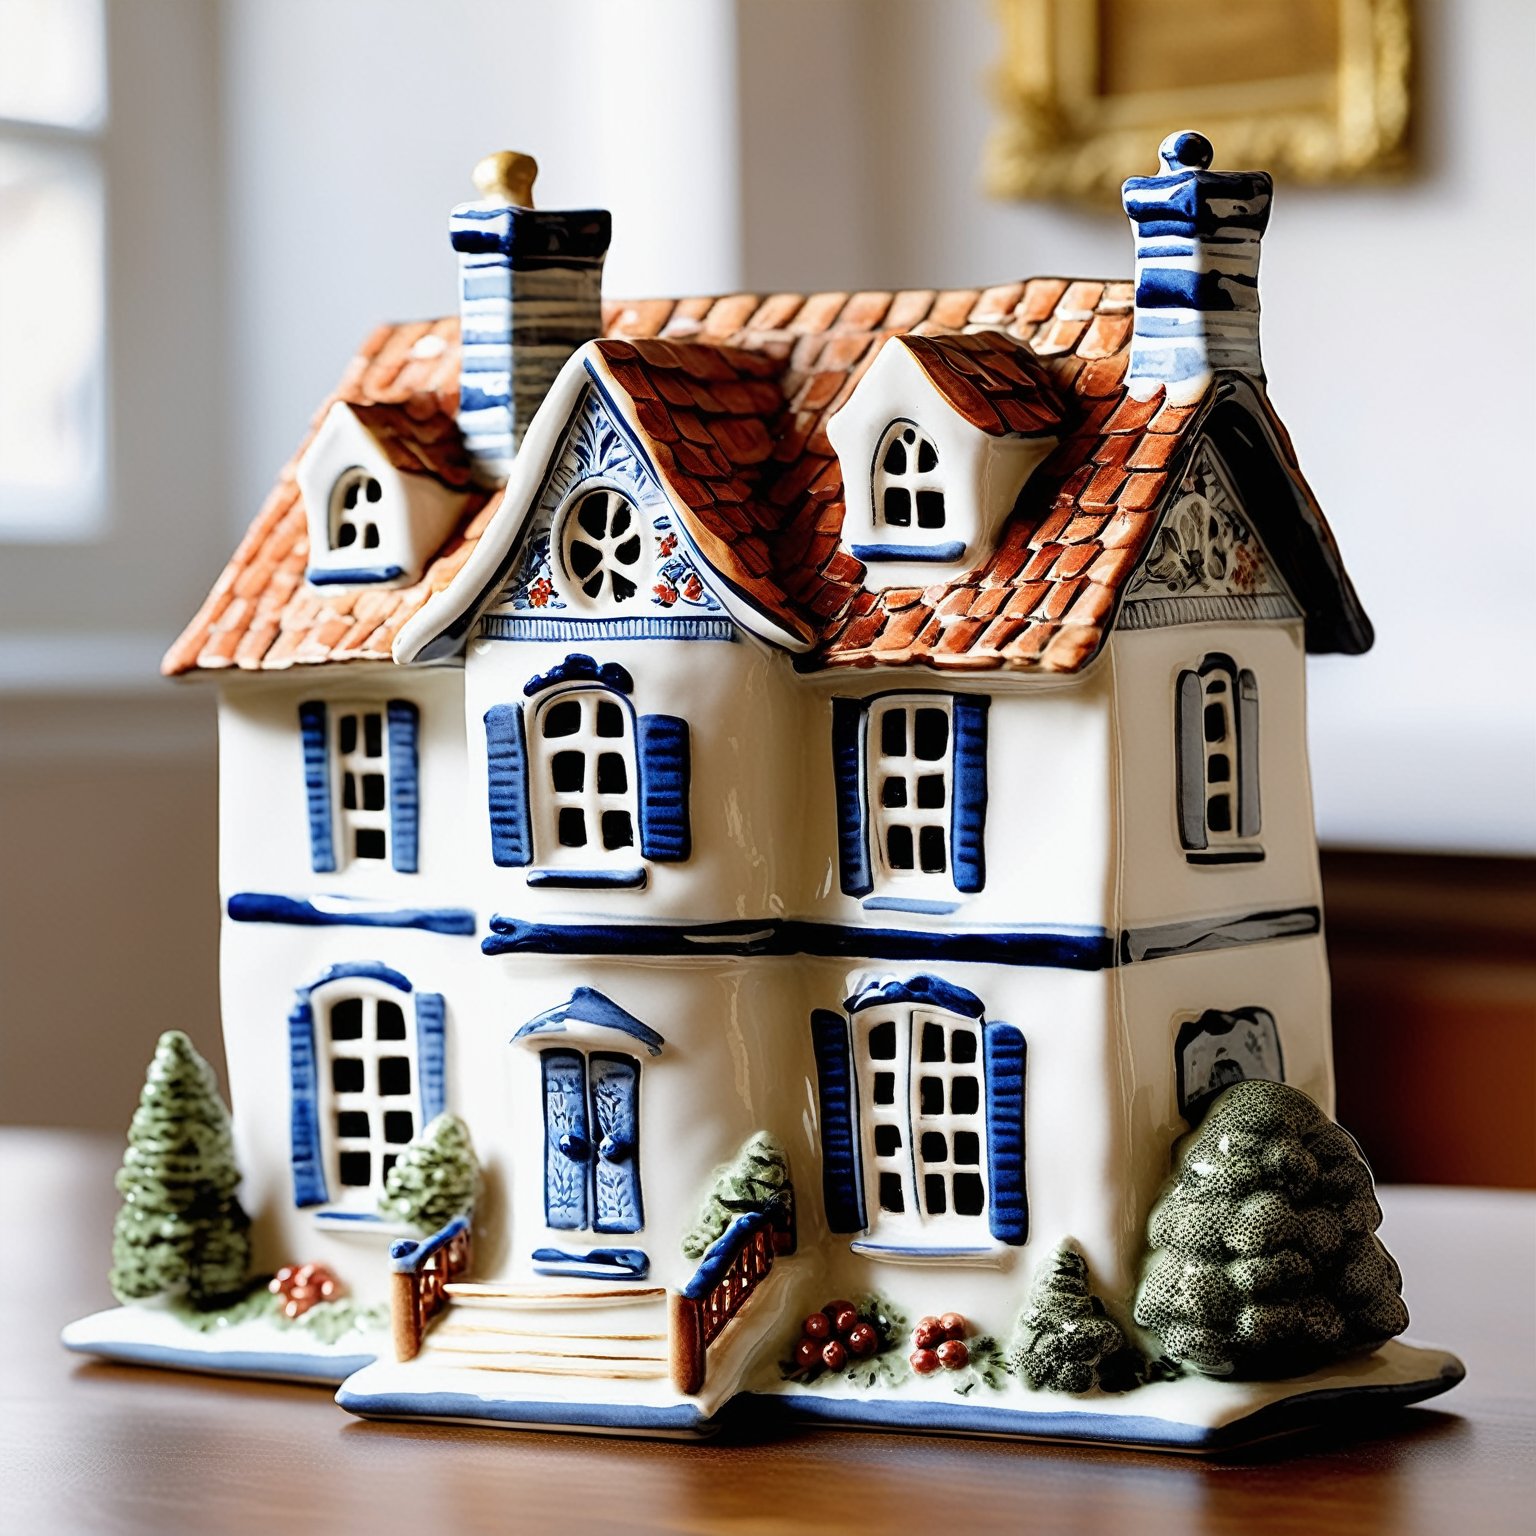 A beautifully crafted ceramic or porcelain figurine of a house